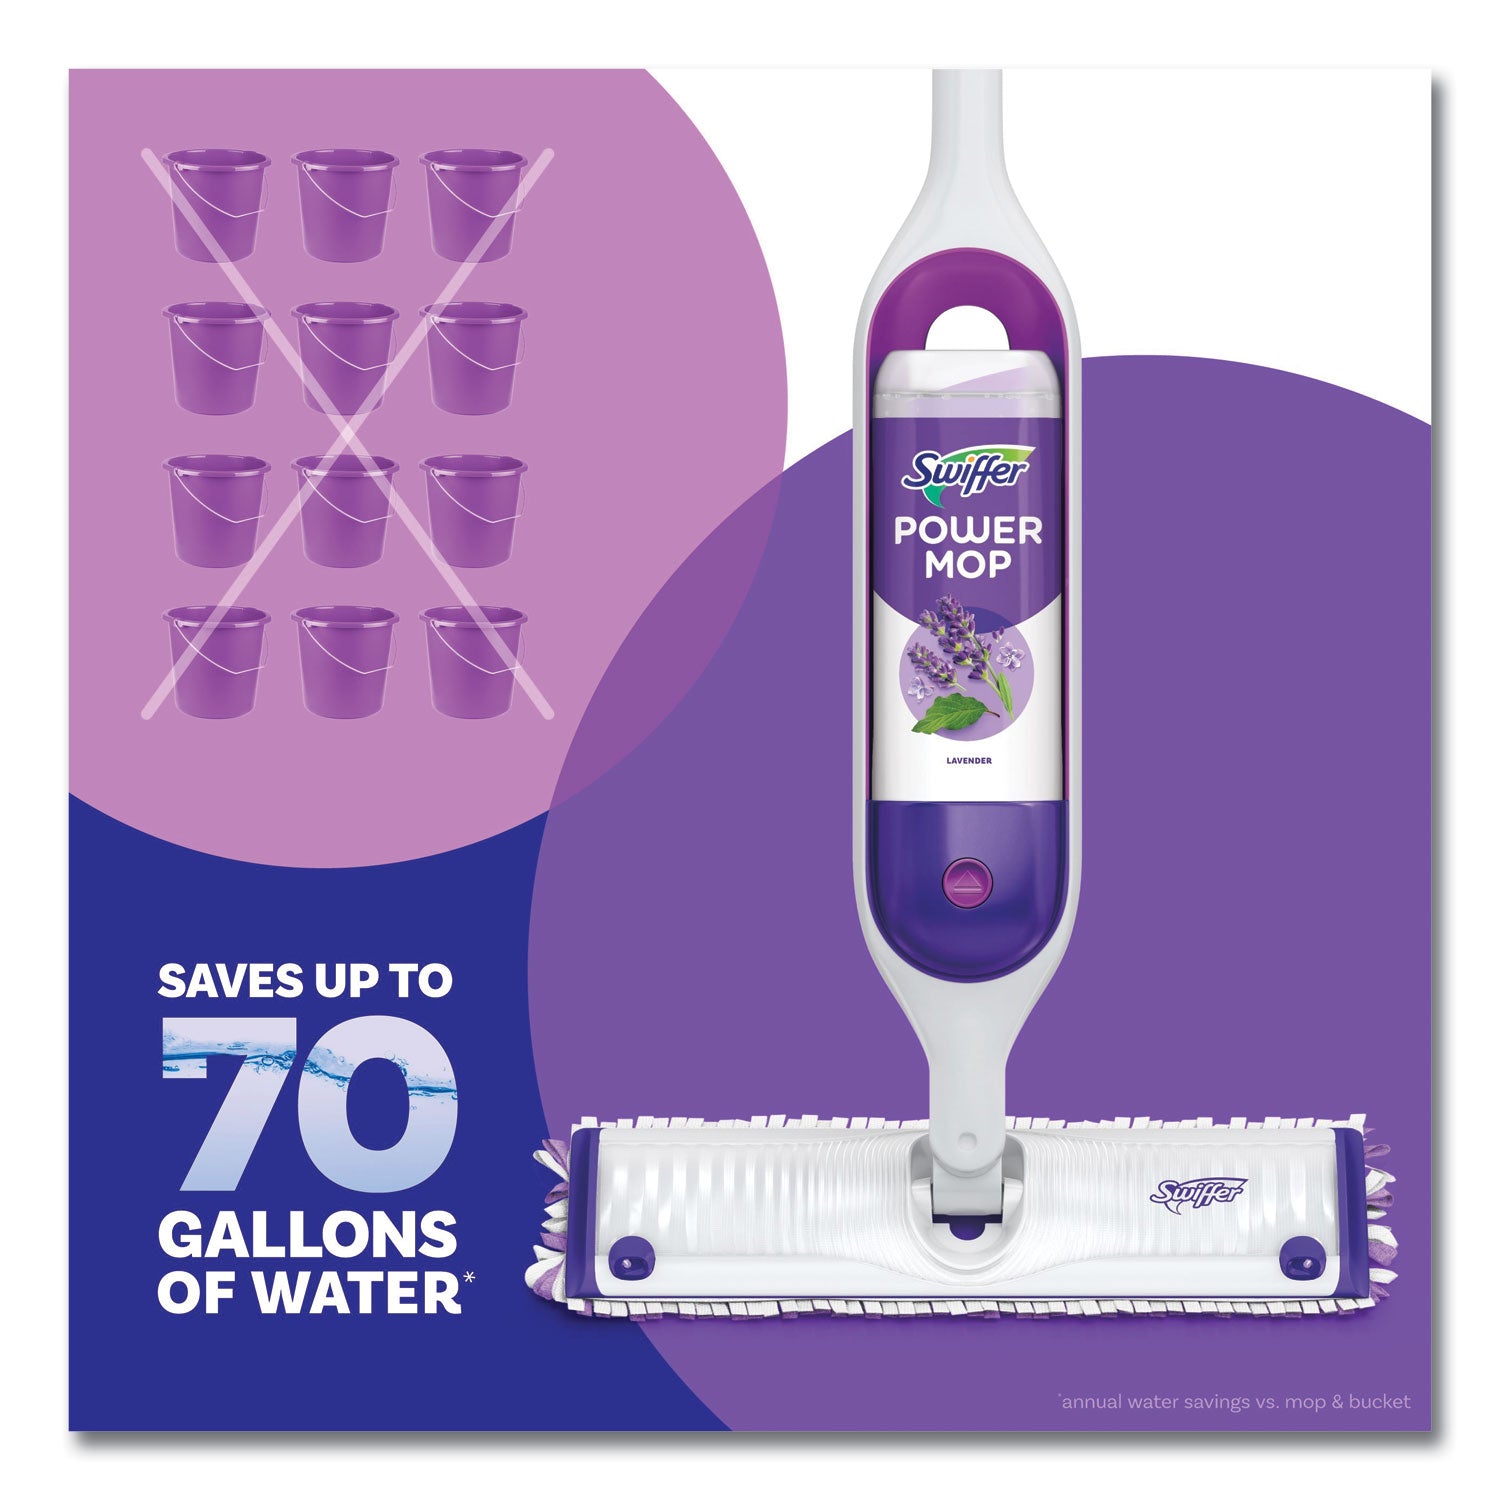 powermop-cleaning-solution-and-pads-refill-pack-lavender-253-oz-bottle-and-5-pads-per-pack-4-packs-carton_pgc09117 - 8